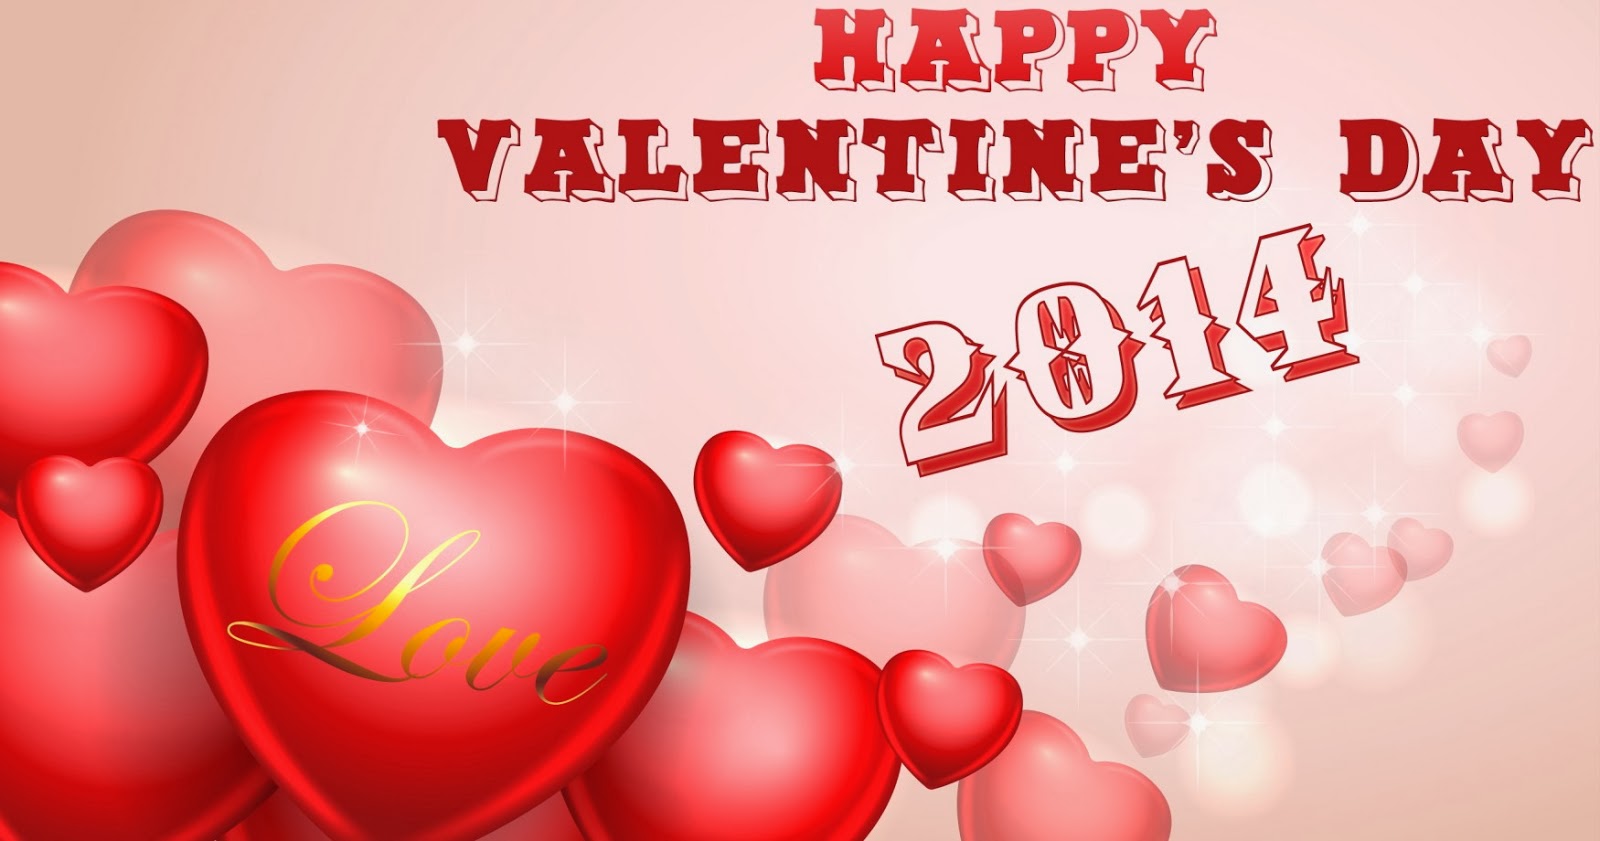 valentine's day hot images | hot hd wallpapers